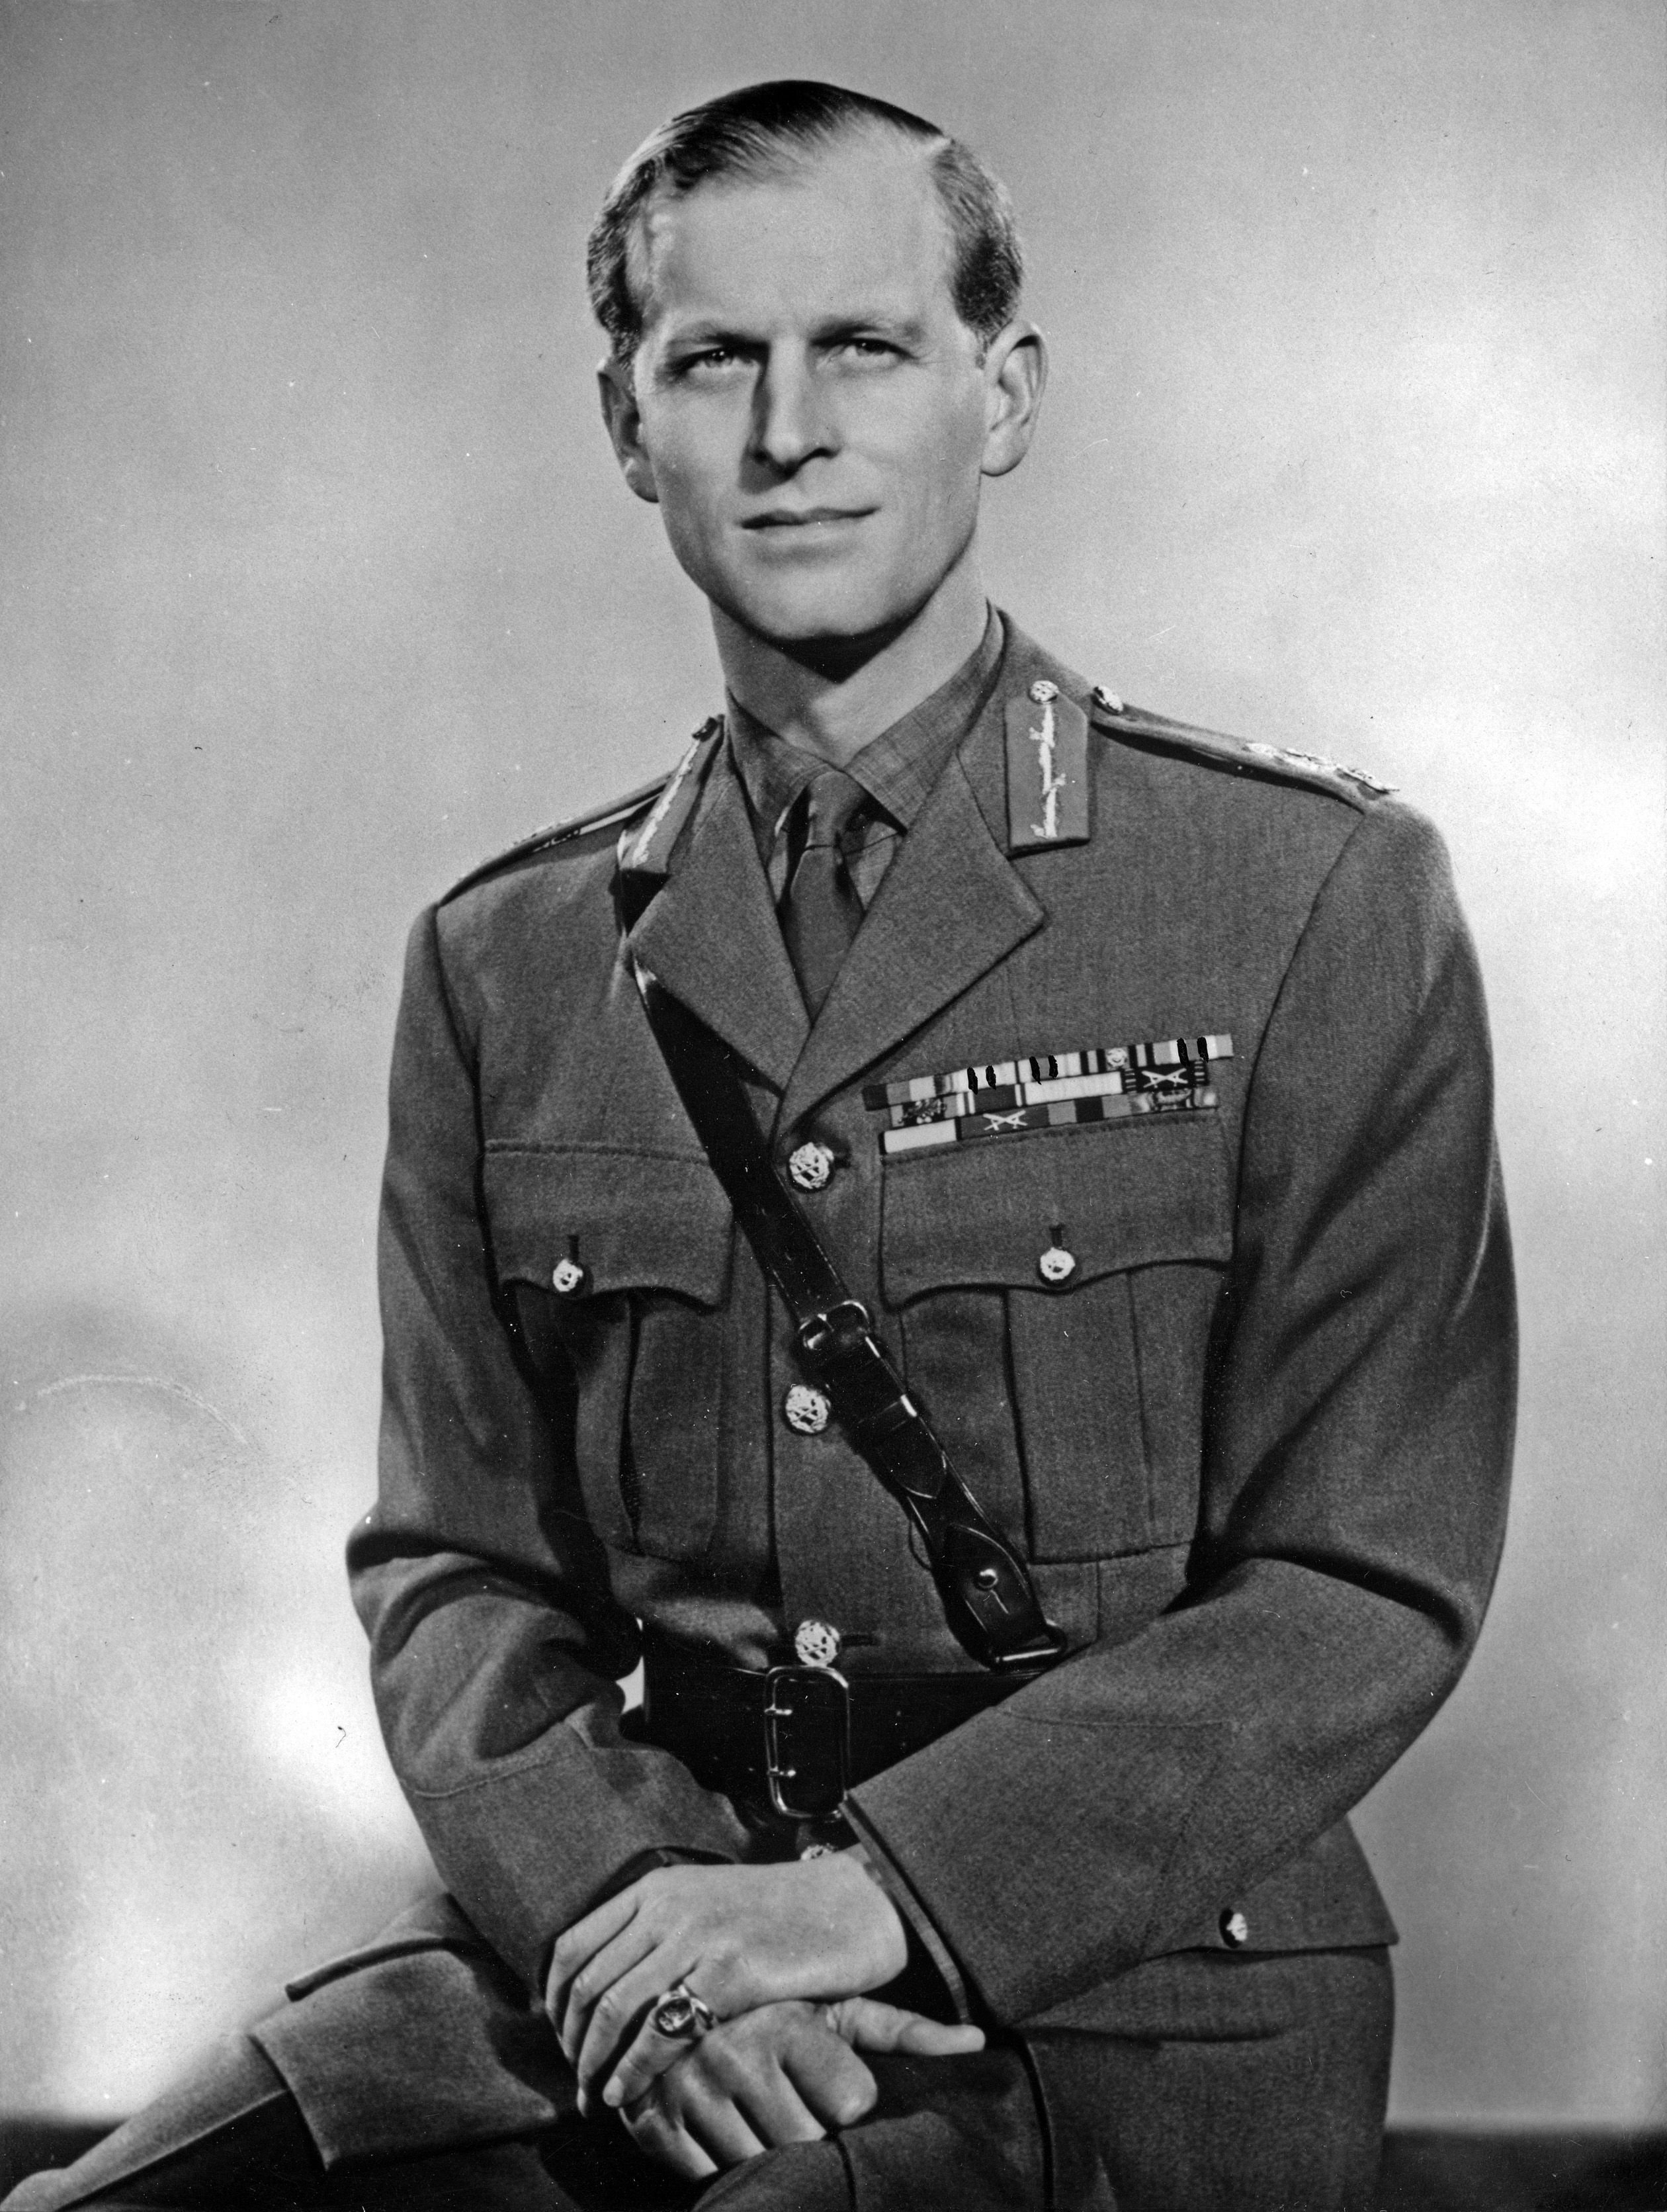 Prince Philip in his uniform of Field Marshal of the British Army, in 1953 | Source: Getty Images